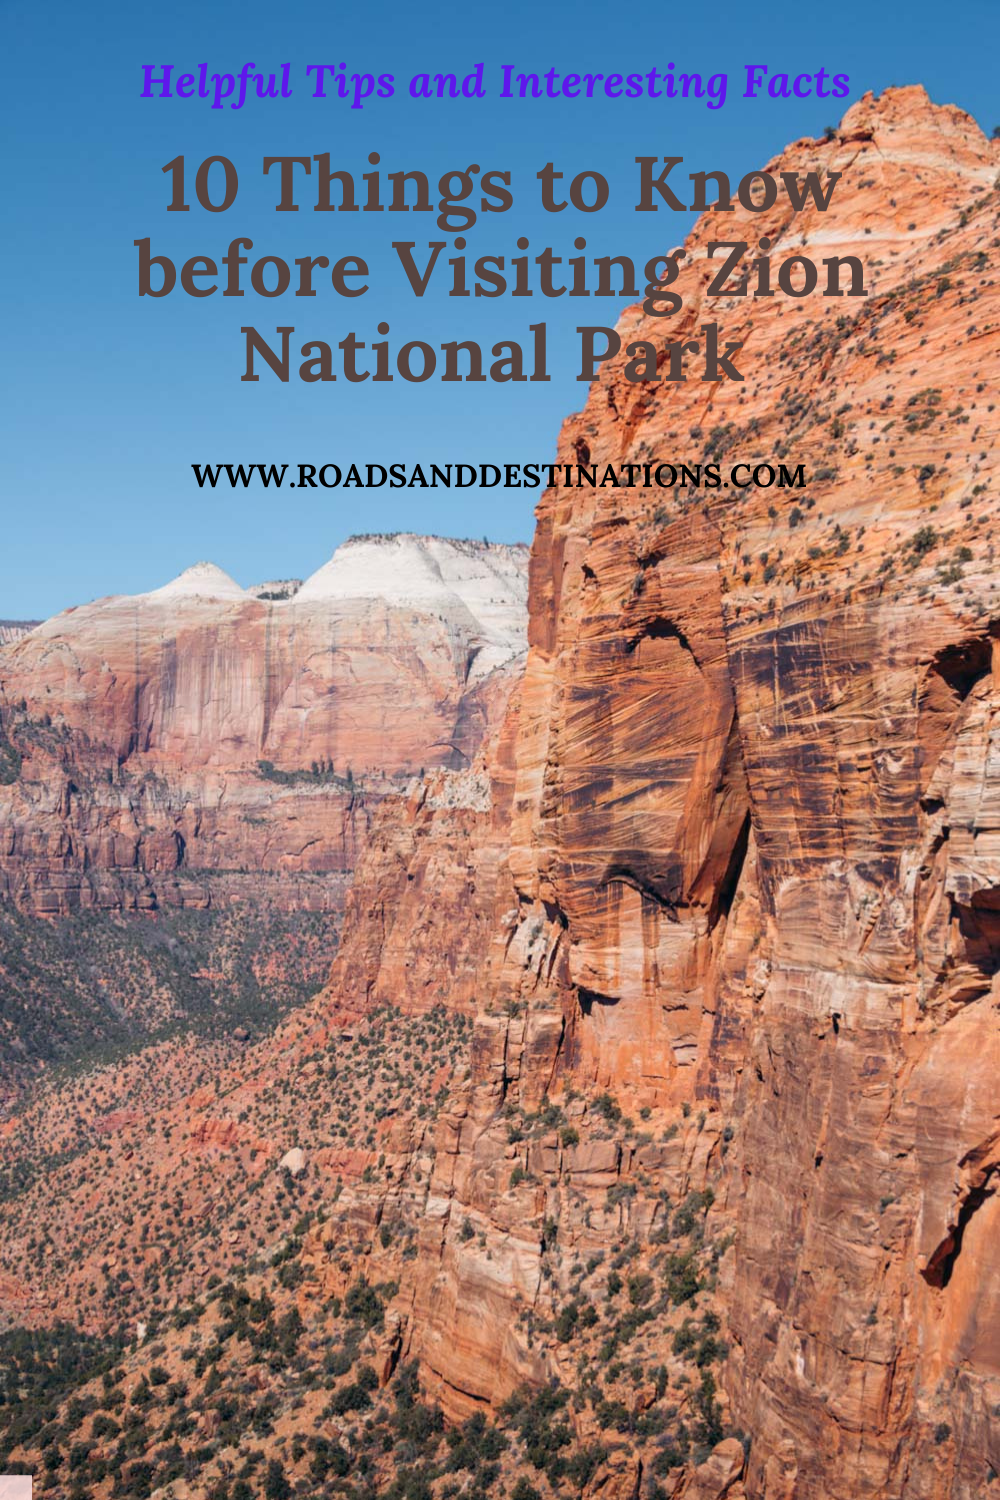 Facts and helpful tips to know before visiting Zion National Park - Roads and Destinations